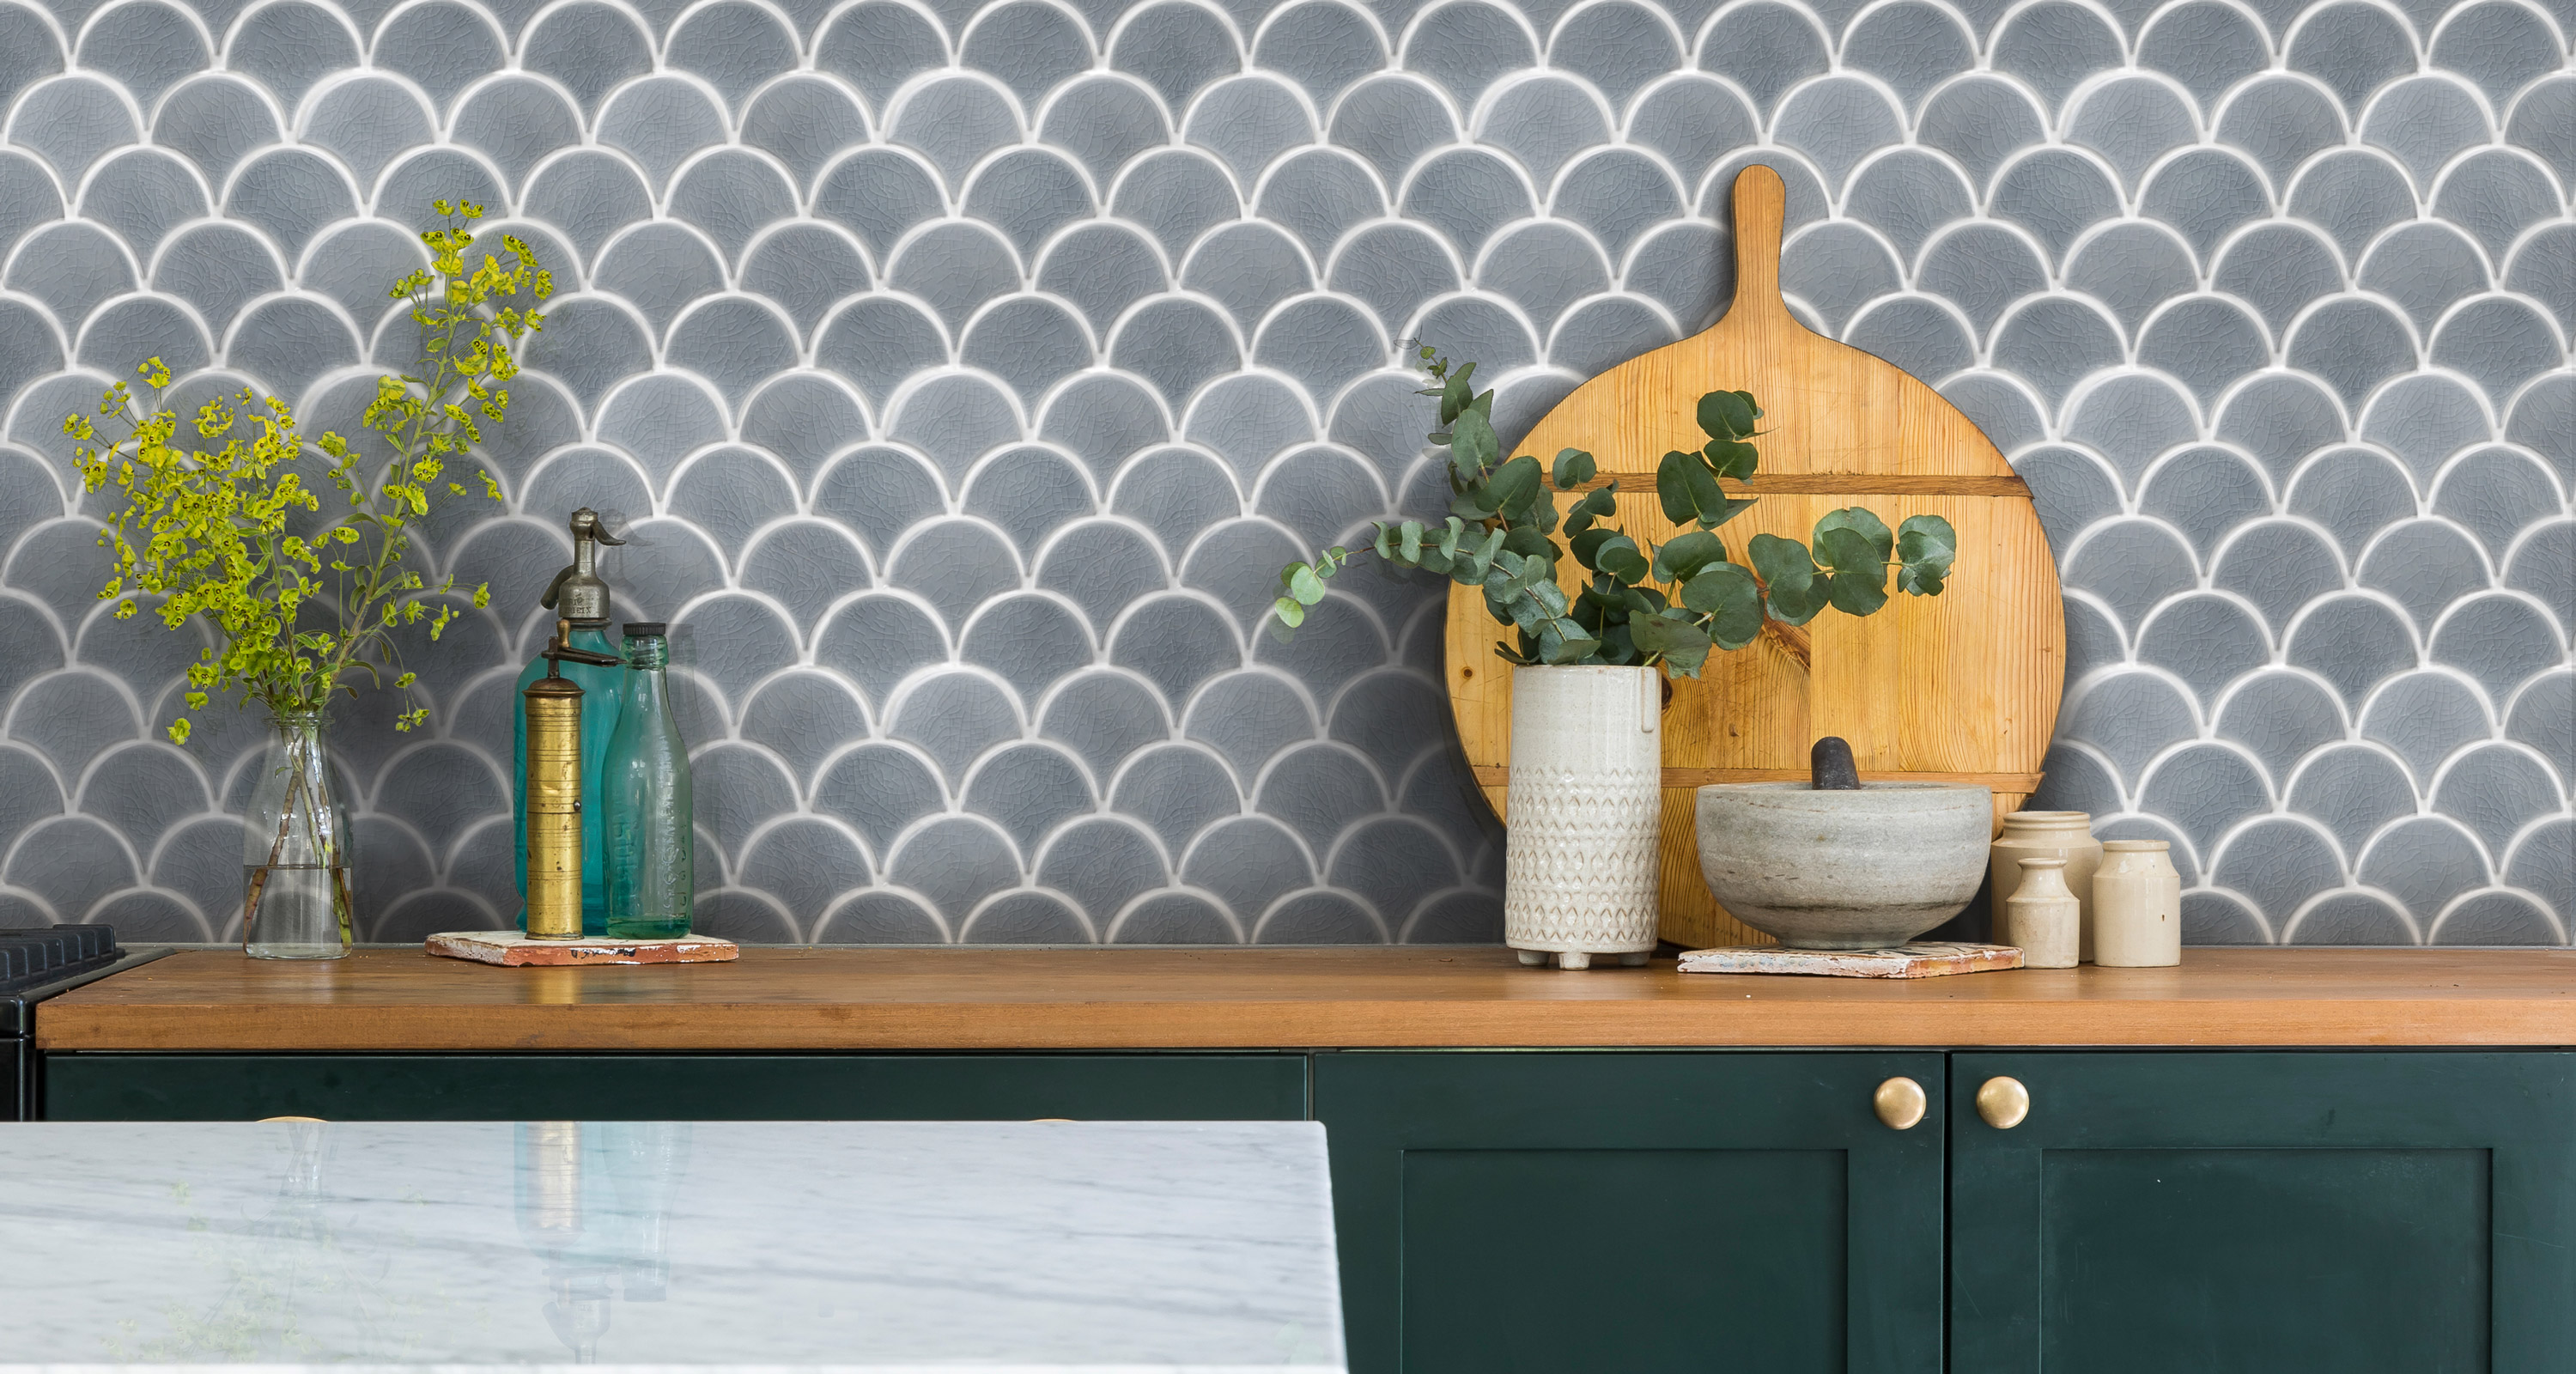 Kitchen wall tile ideas: bring color, pattern and style to vertical  surfaces |